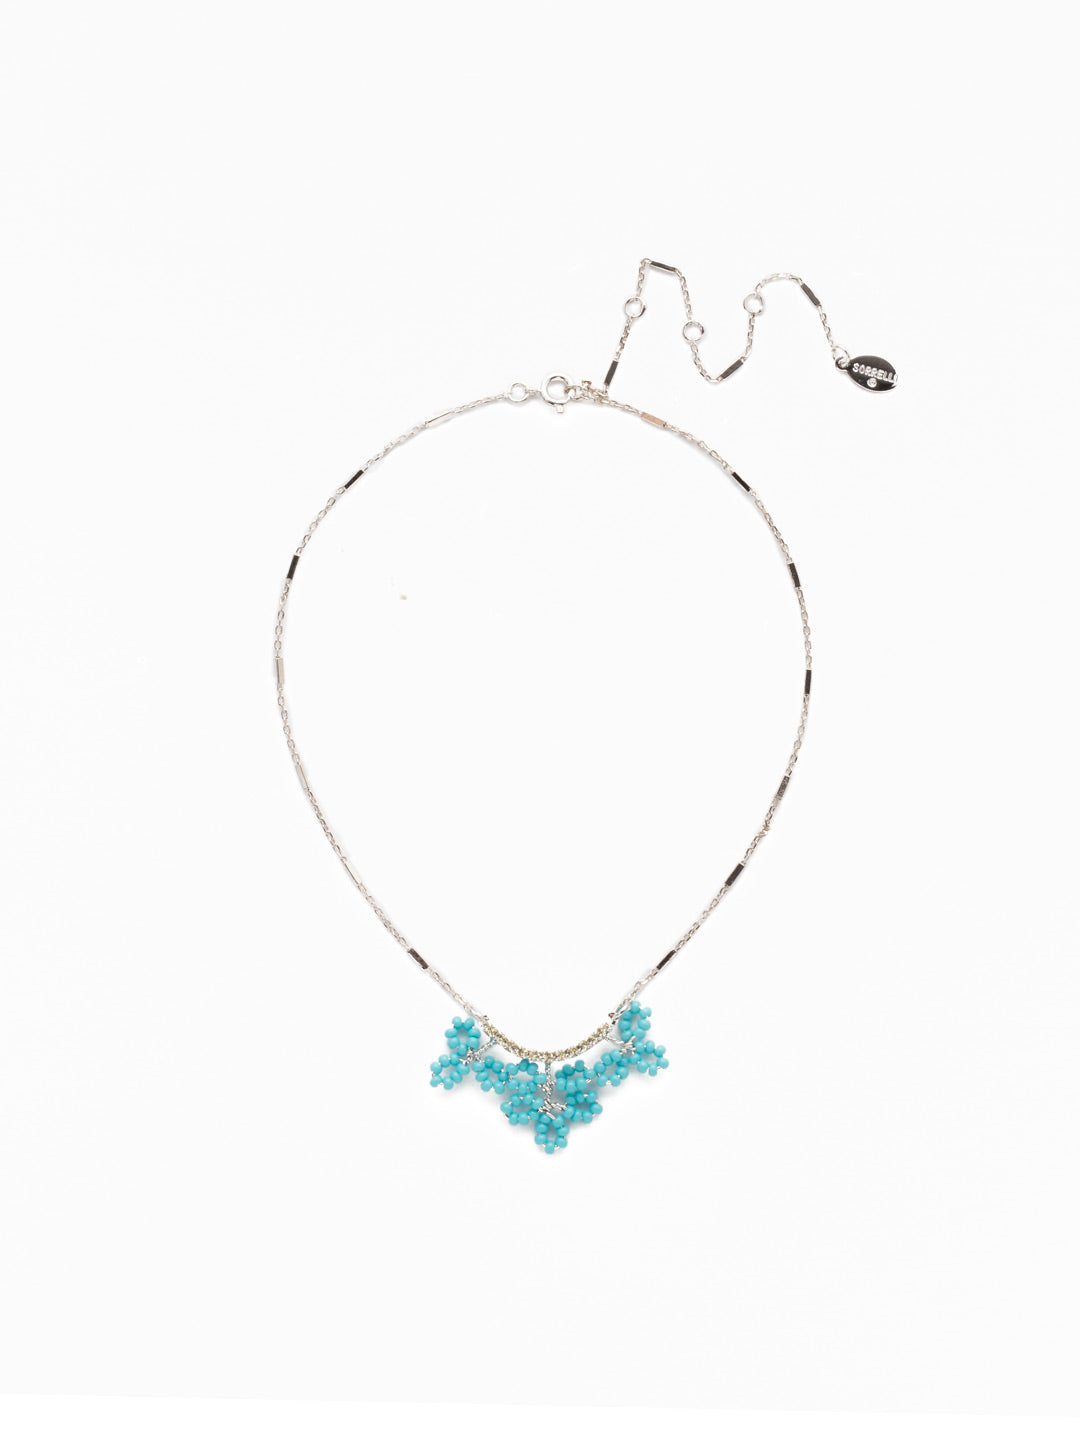 Sefina Pendant Necklace - NEH8RHTHT - <p>Clusters of handcrafted beadwork and delicate crystals on an adjustable strand will make you feel like an Island princess. From Sorrelli's Tahitian Treat collection in our Palladium Silver-tone finish.</p>